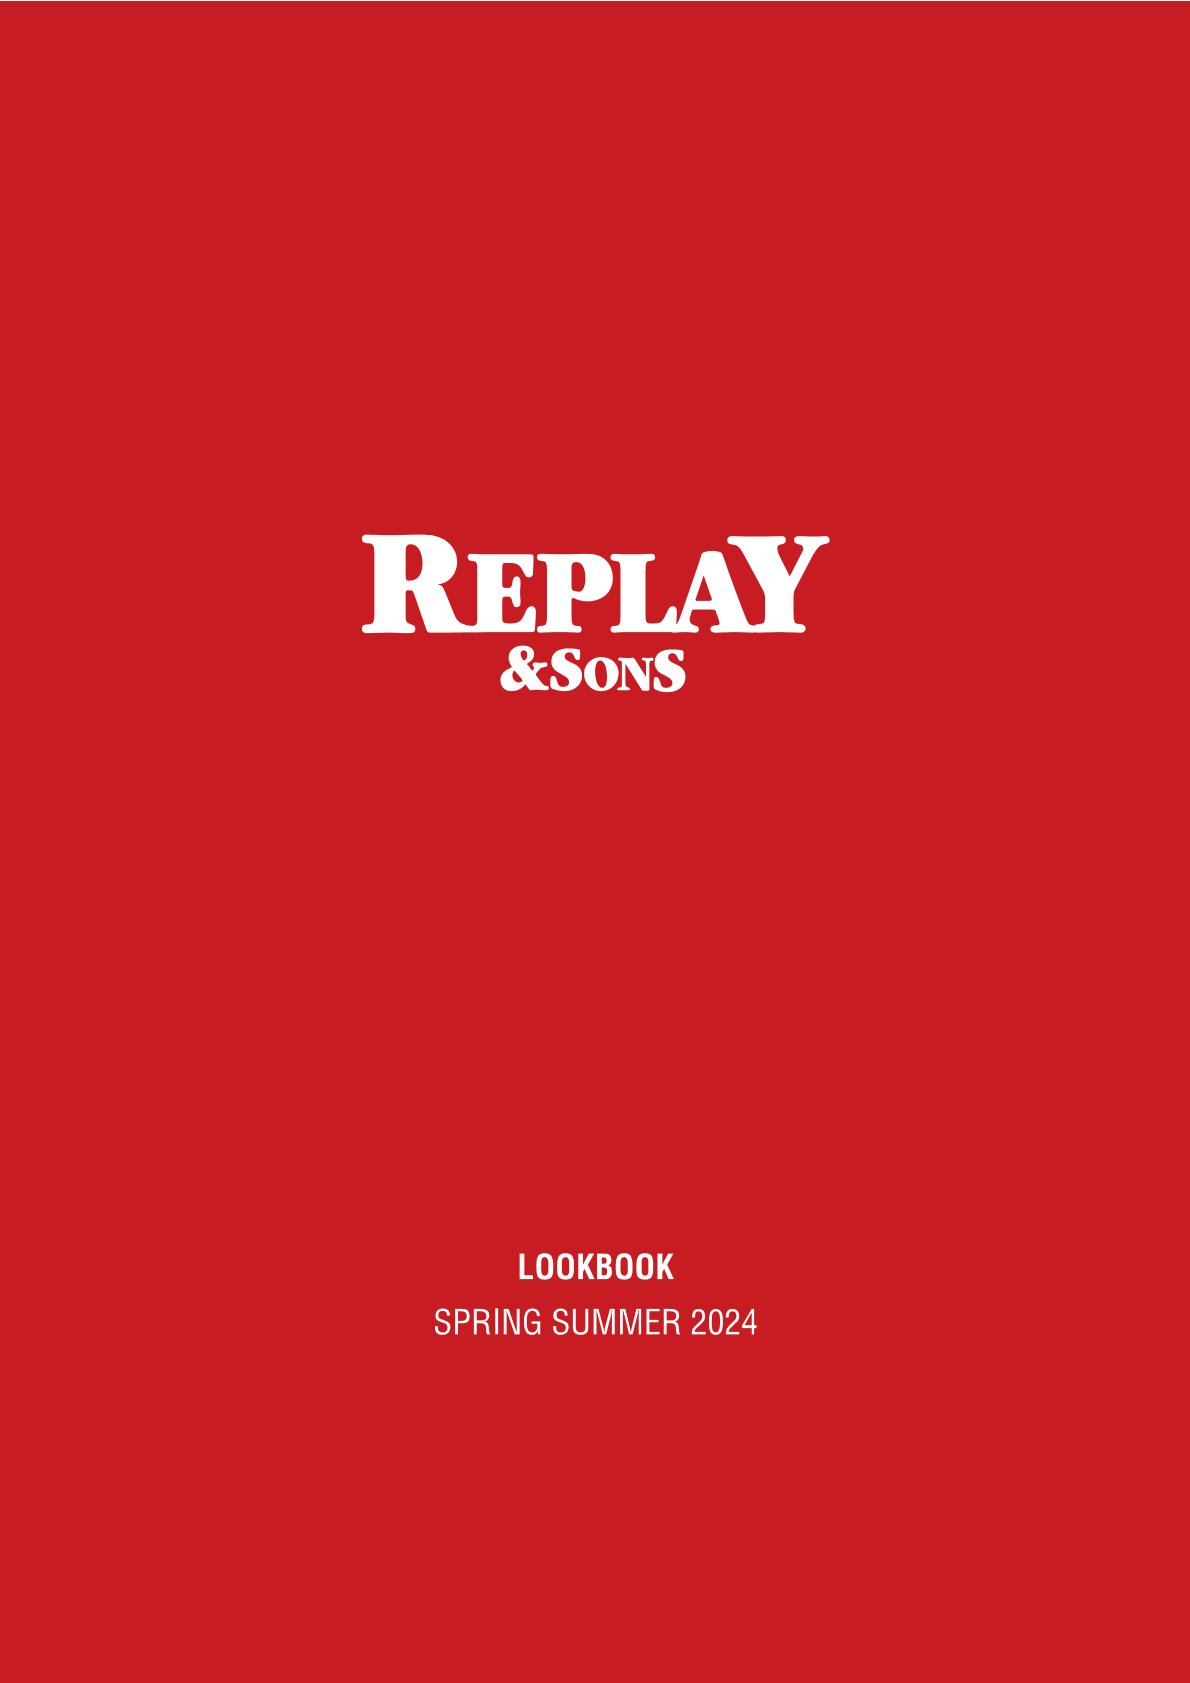 replay replay & sons